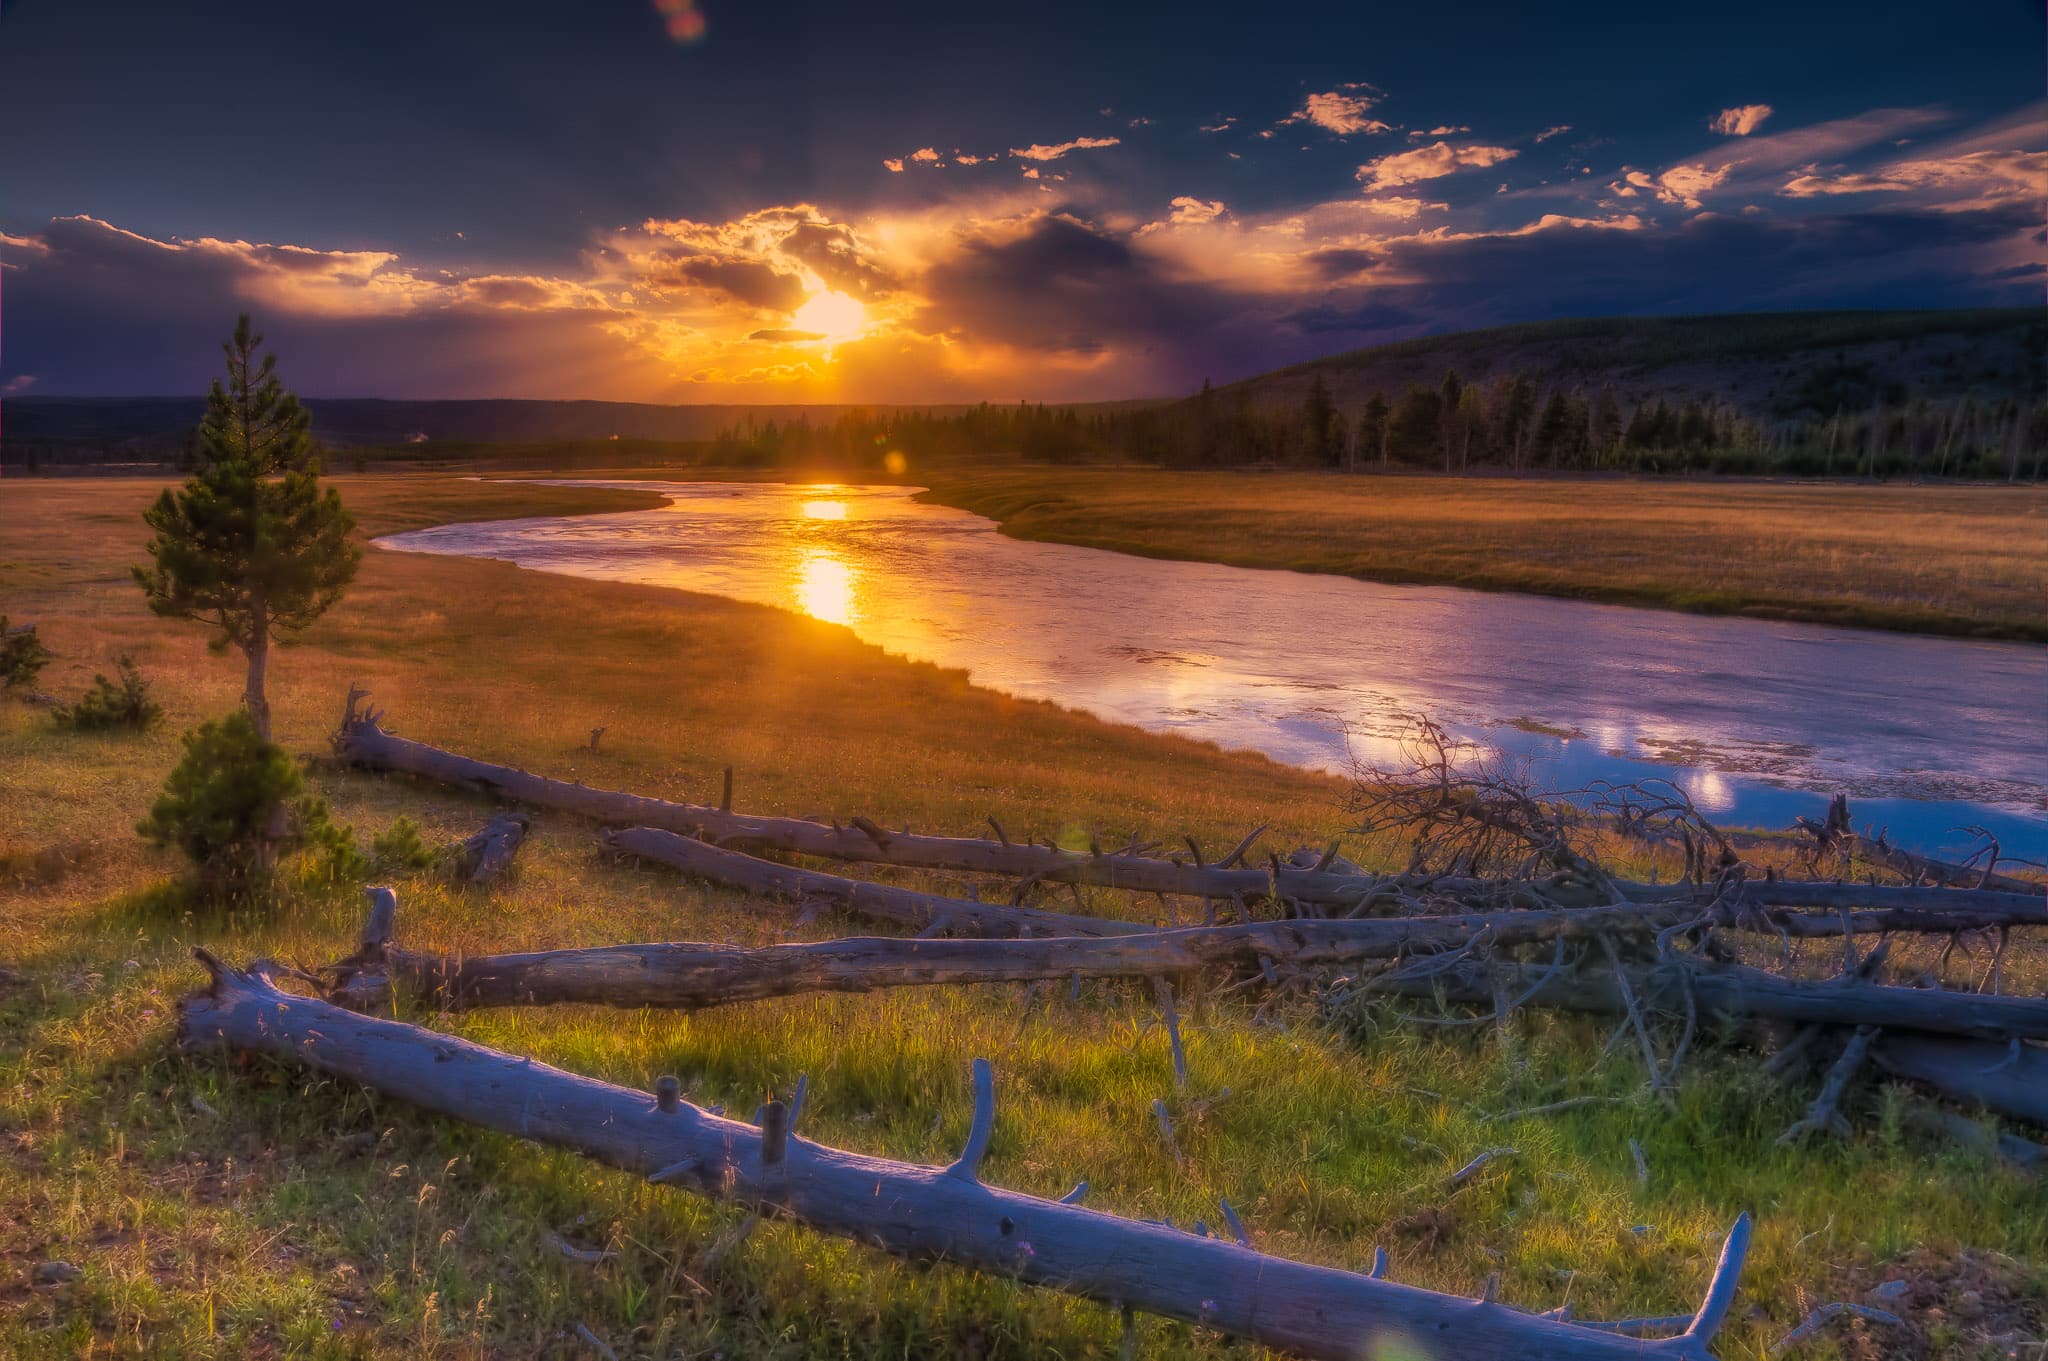 View of the Firehole River at sundown in Yellowstone National Park, Wyoming